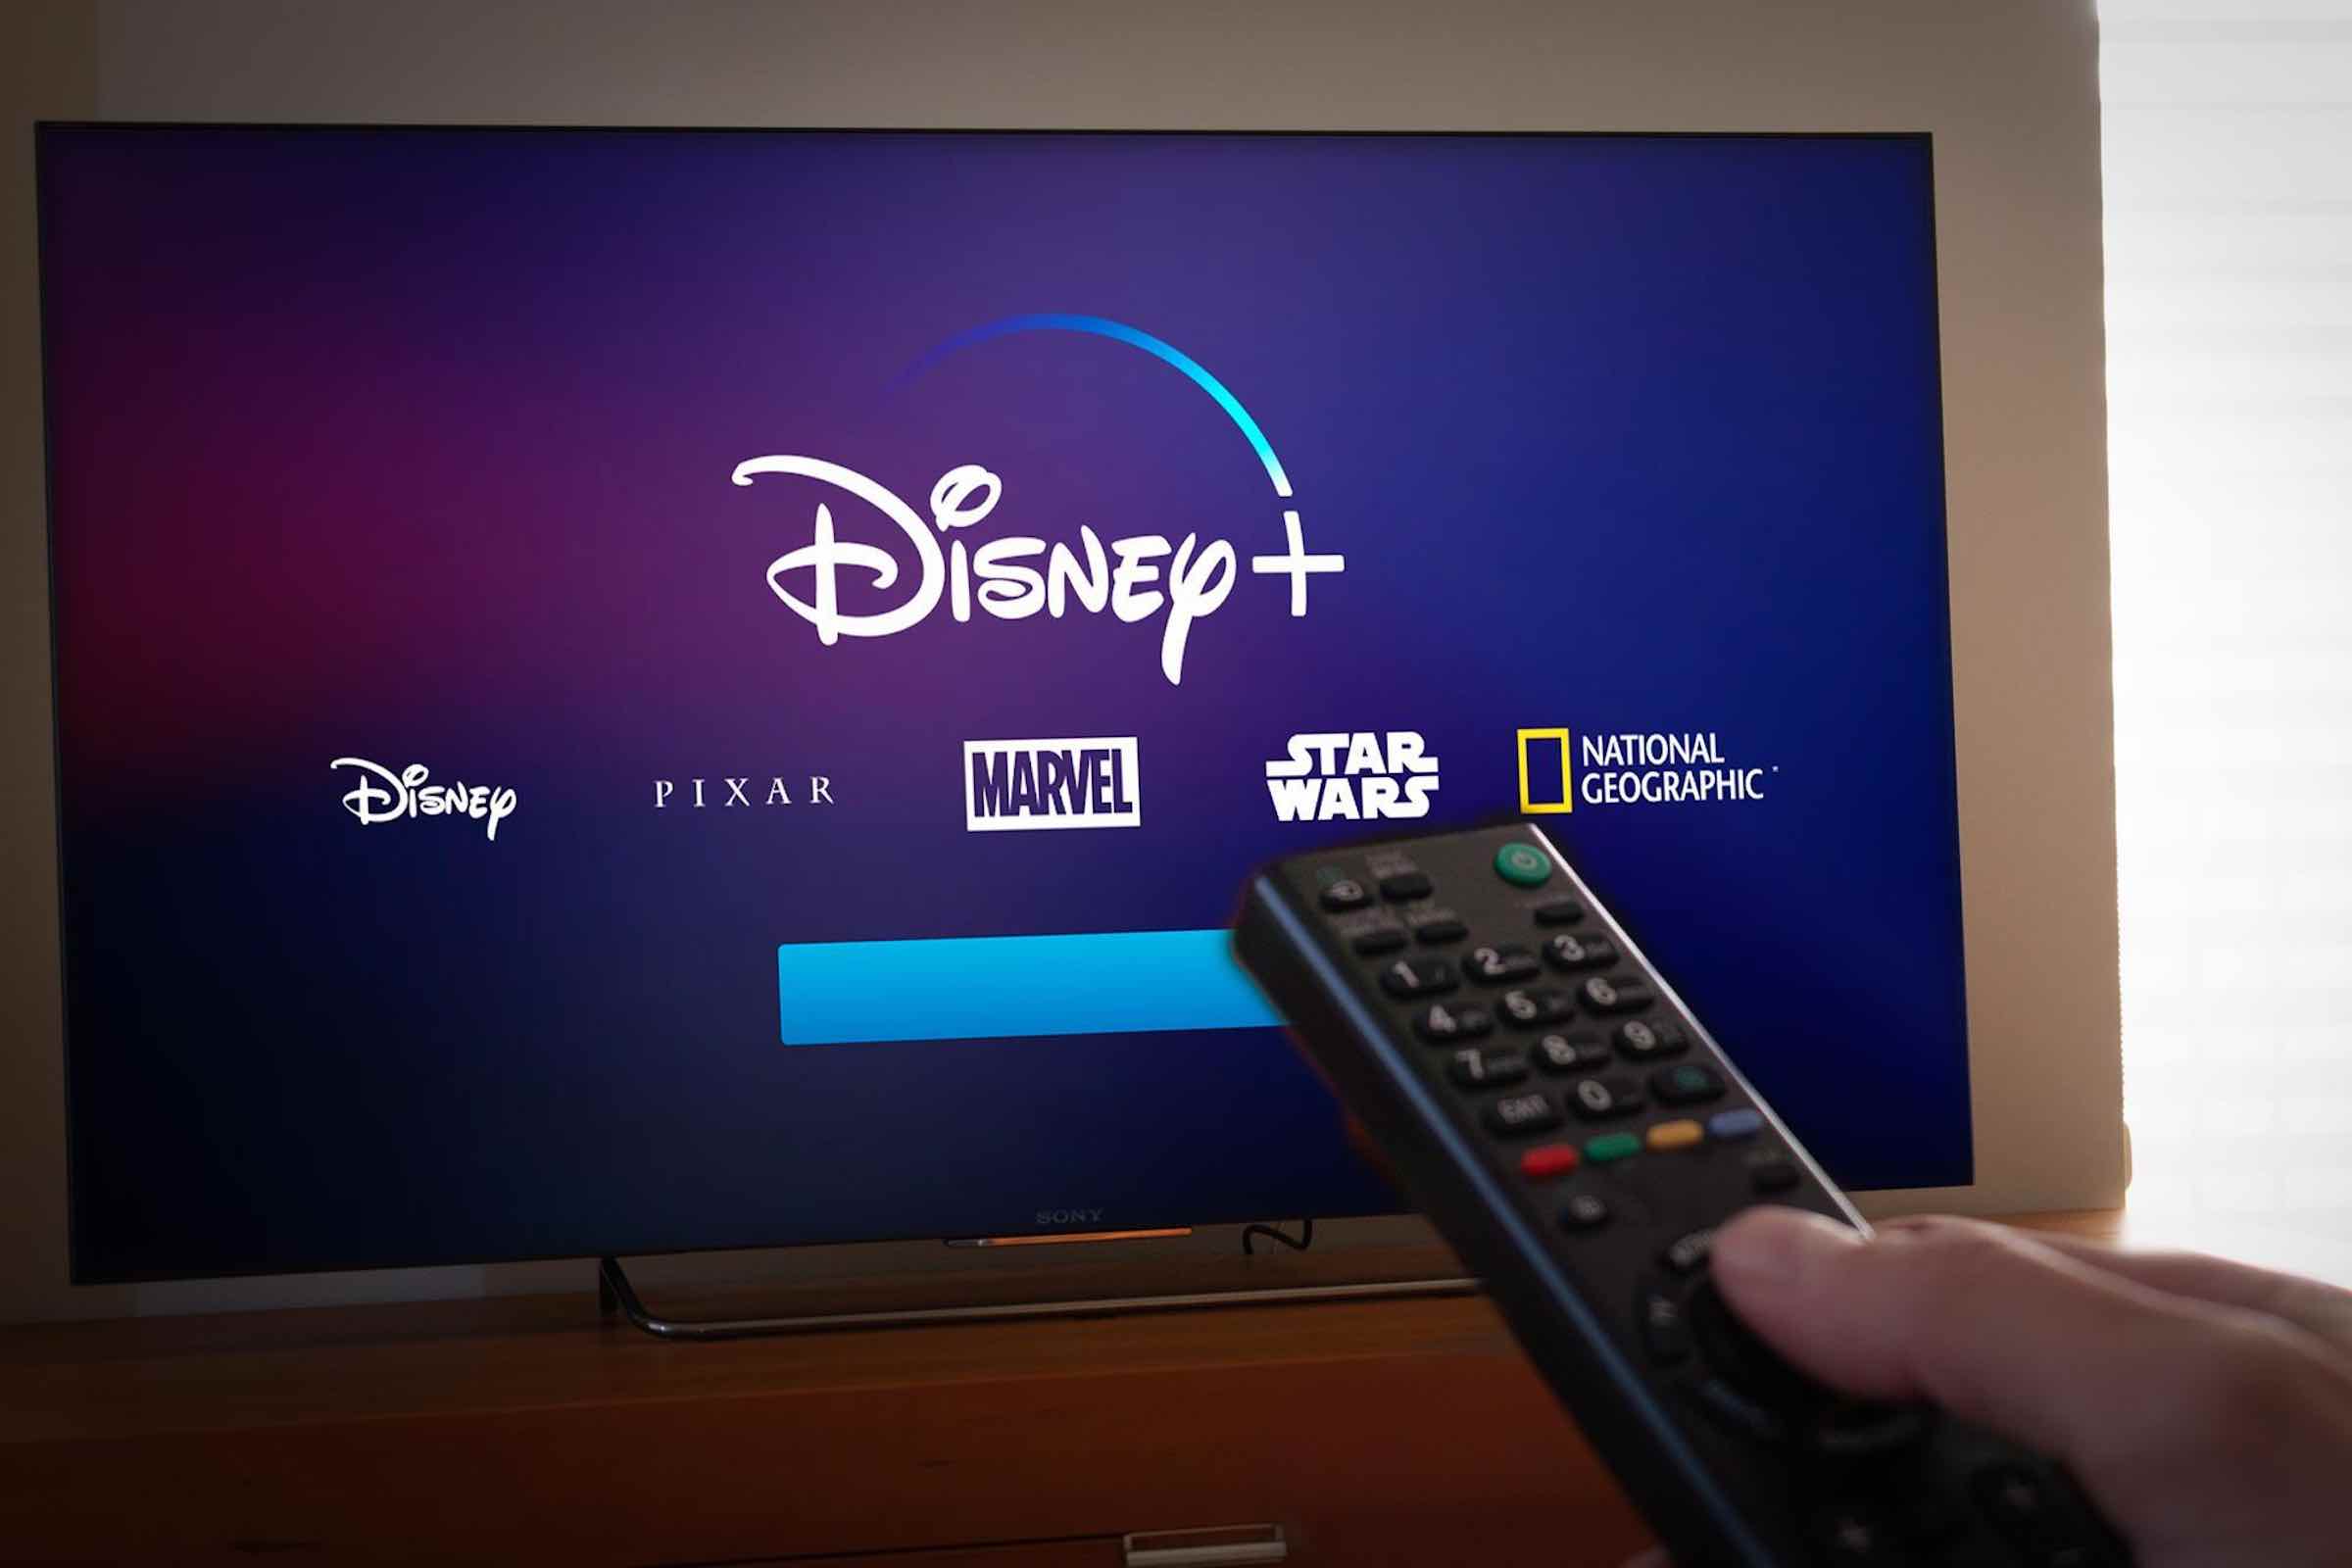 Looking for content to binge watch? With Disney Plus Premier Access, you can watch even more of our favorite movies and shows. See what's in store here.